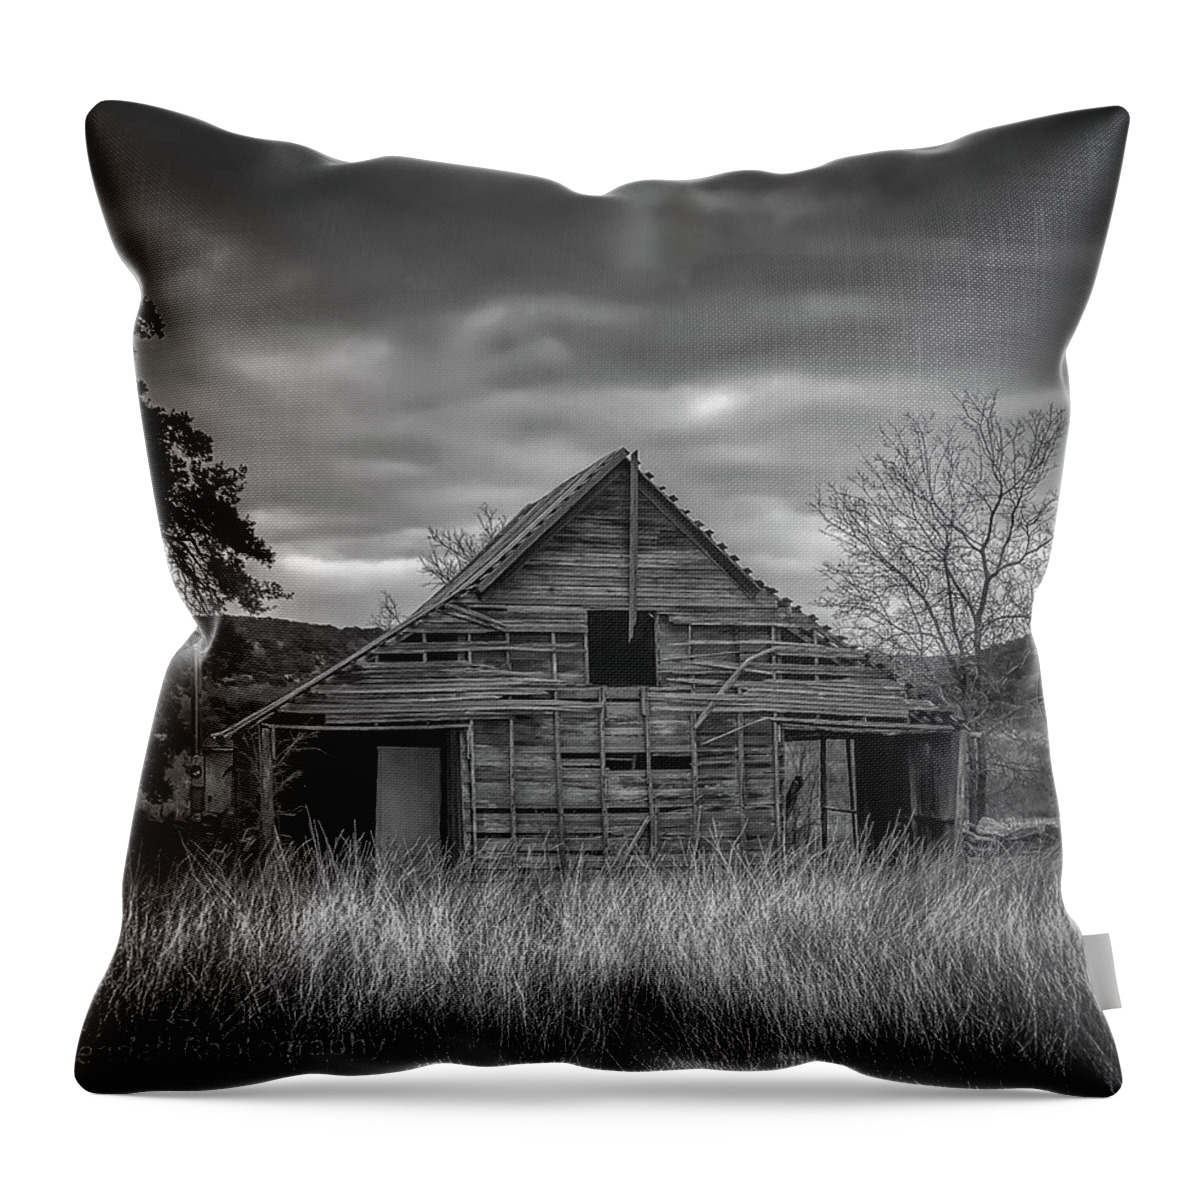 Abandoned Throw Pillow featuring the photograph Abandoned by Pam Rendall